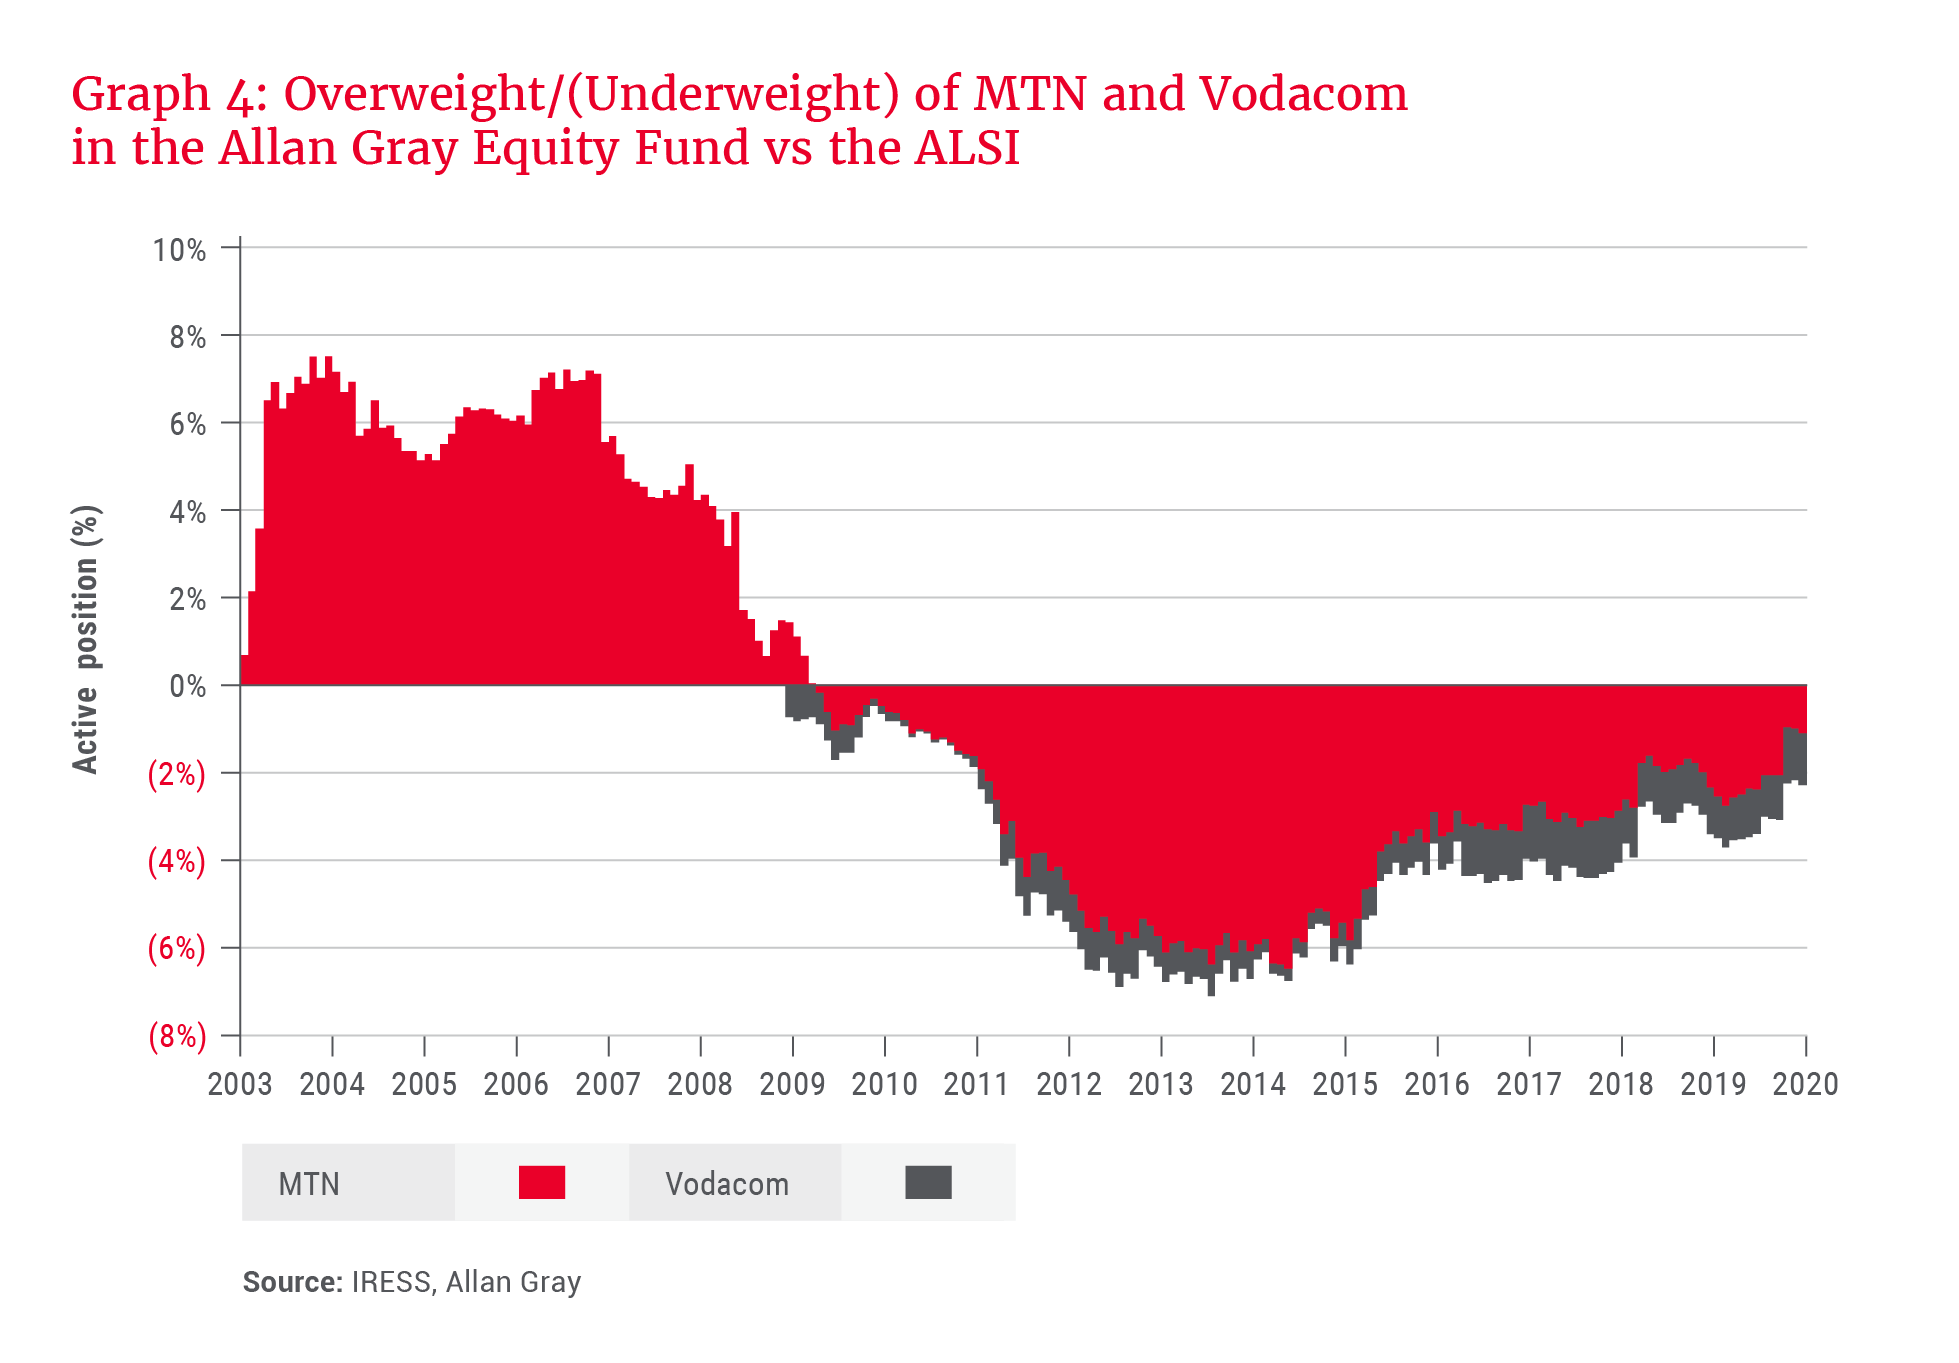 Overweight/(underweight) of MTN and Vodacom in the Allan Gray Equity Fund vs the ALSI